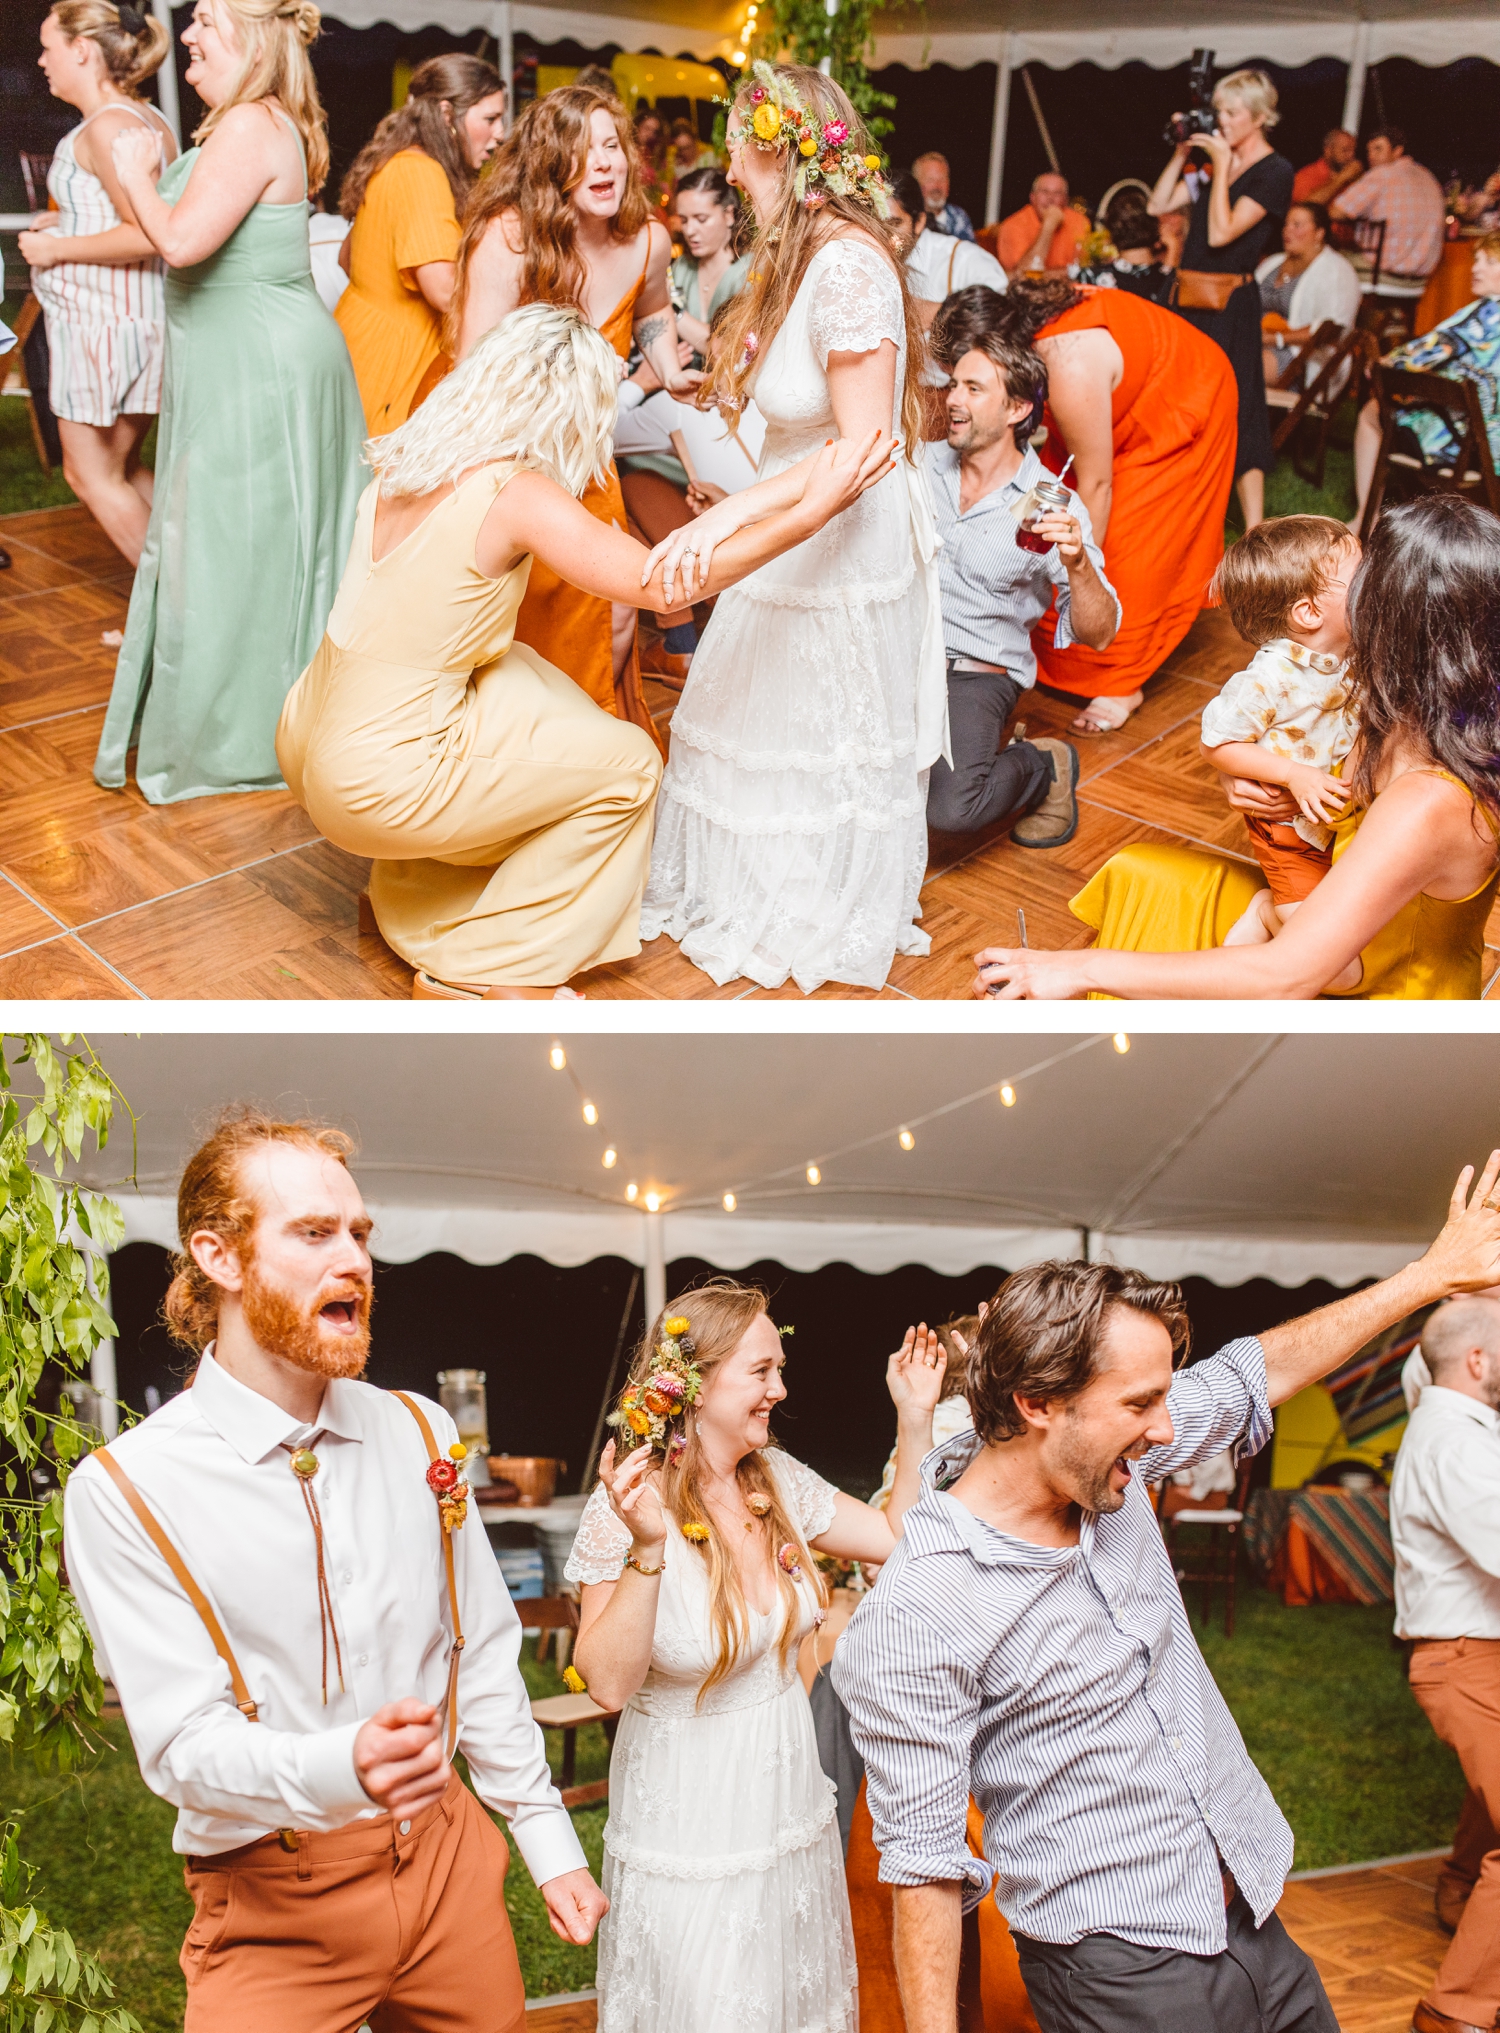 Bride dancing with wedding guests | bride and groom dancing with wedding guest at reception | Brooke Michelle Photography